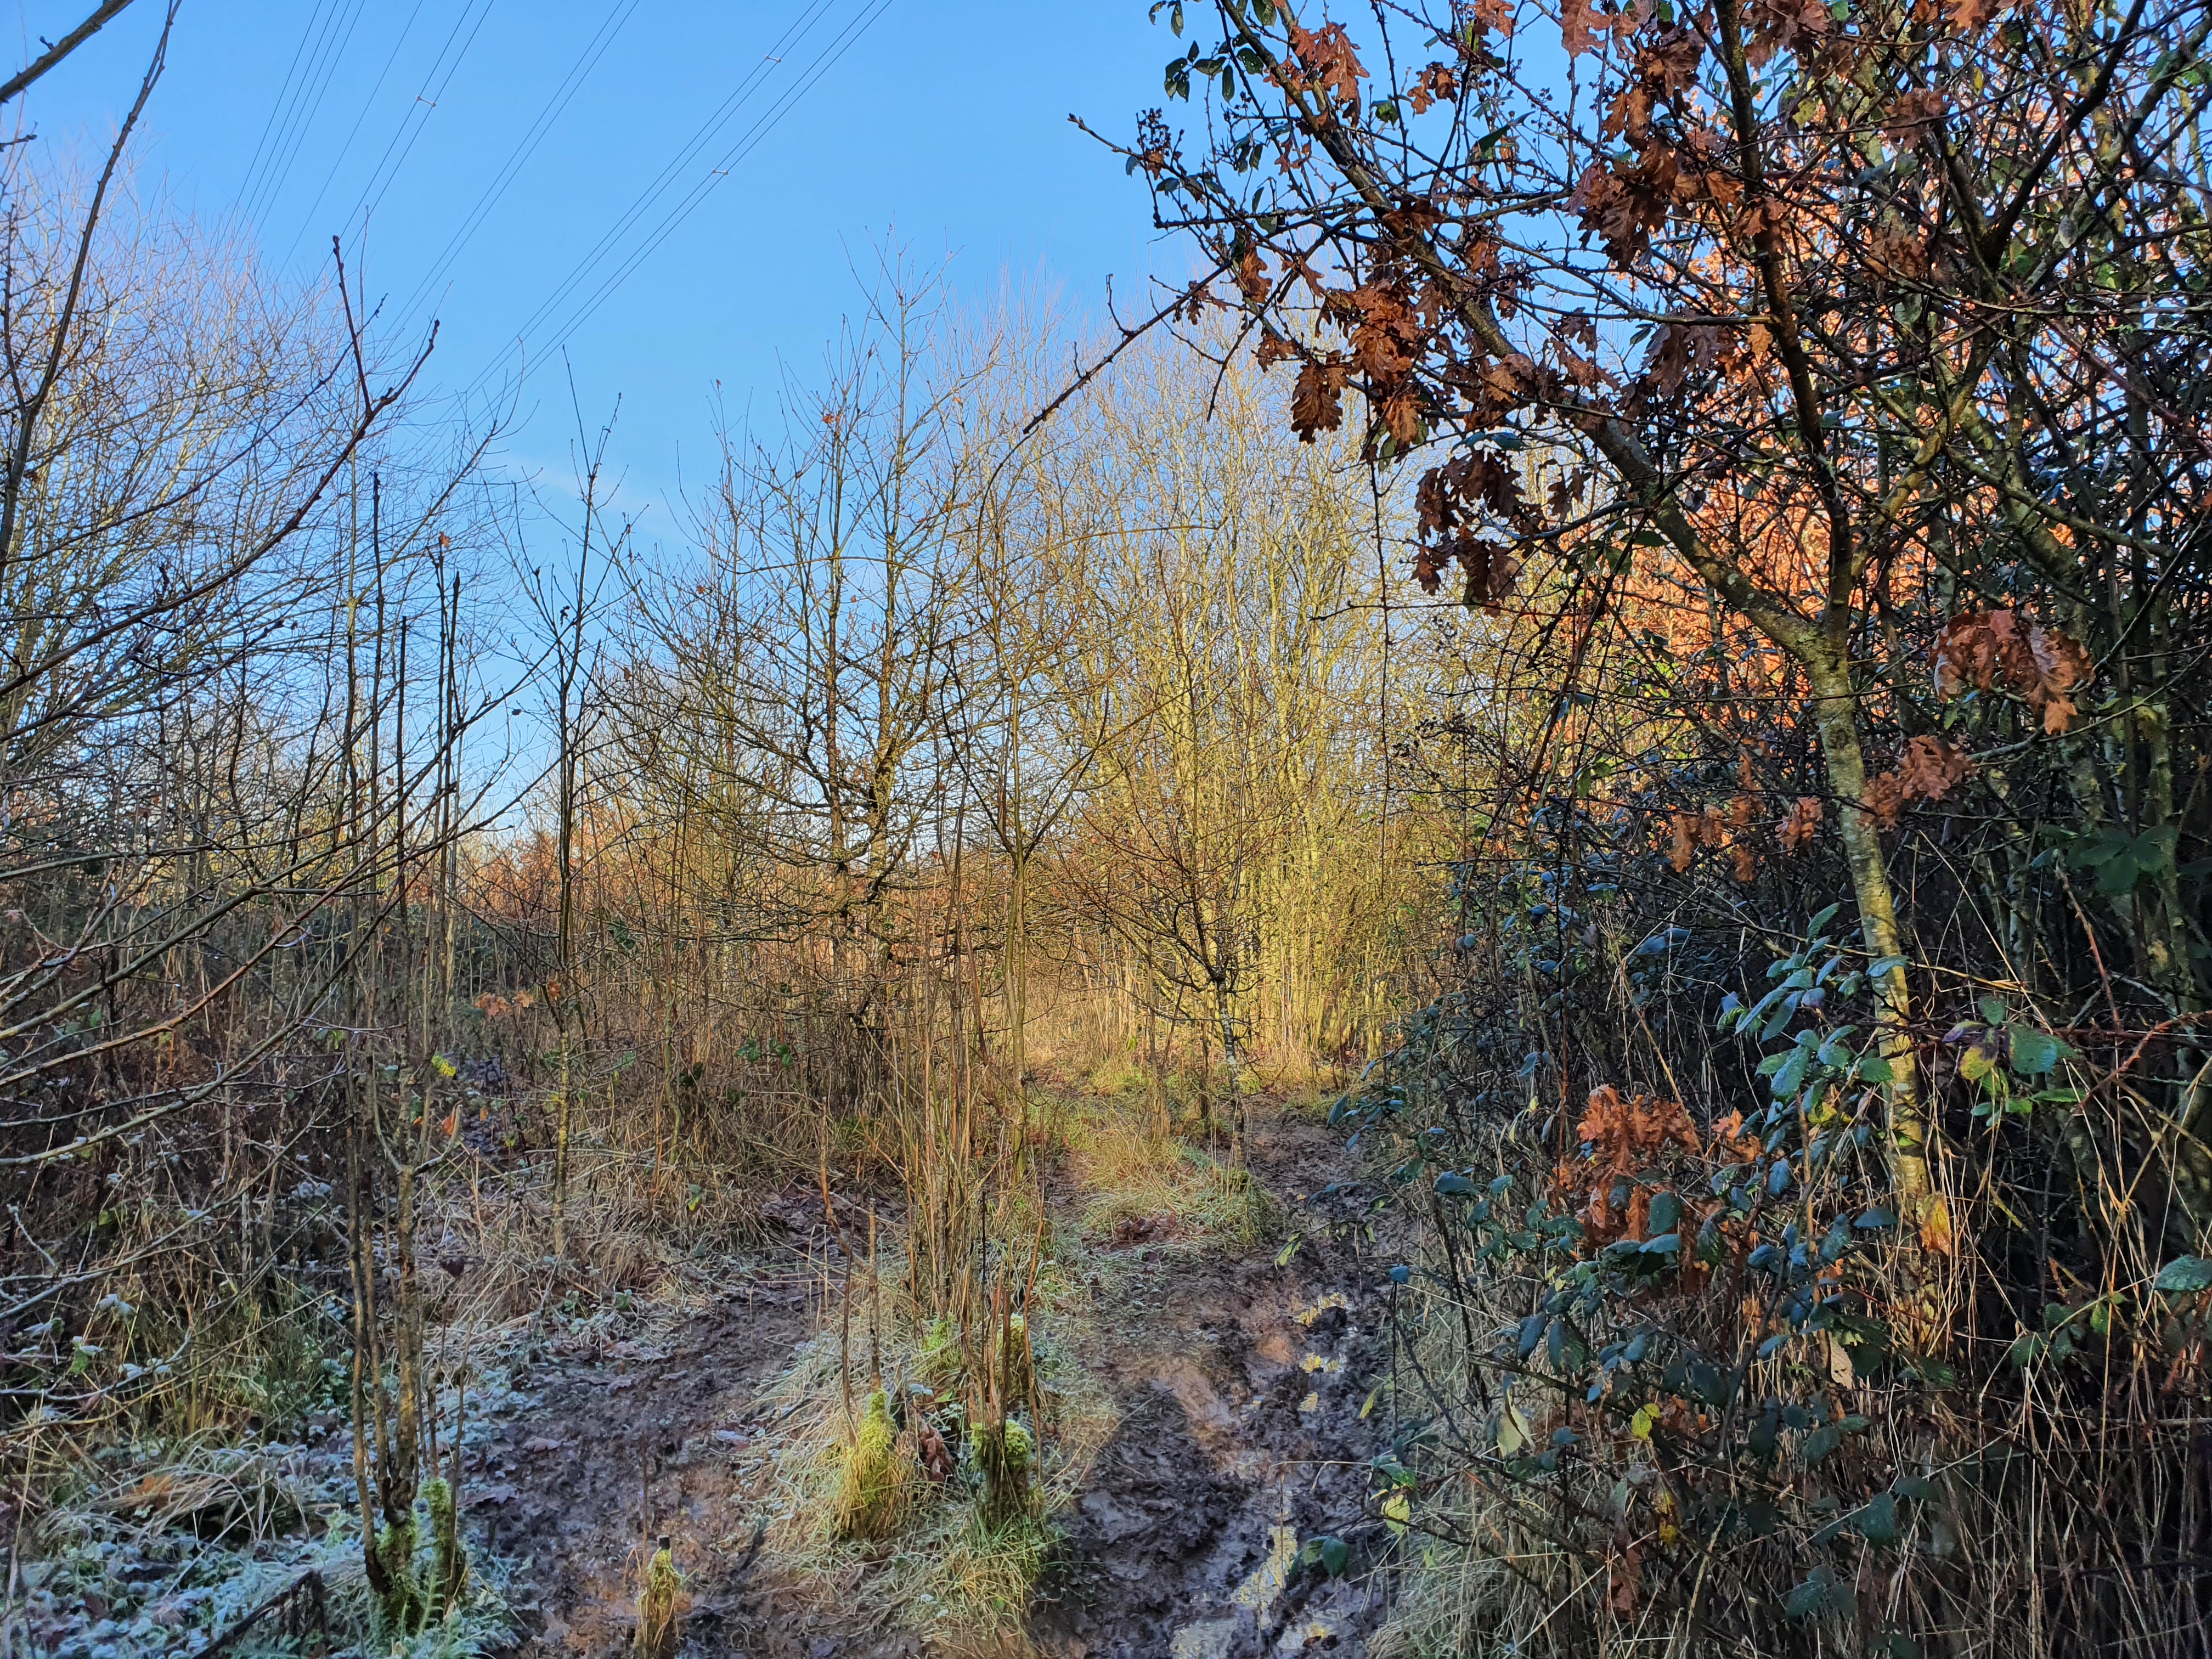 Scrubby trees and very muddy path